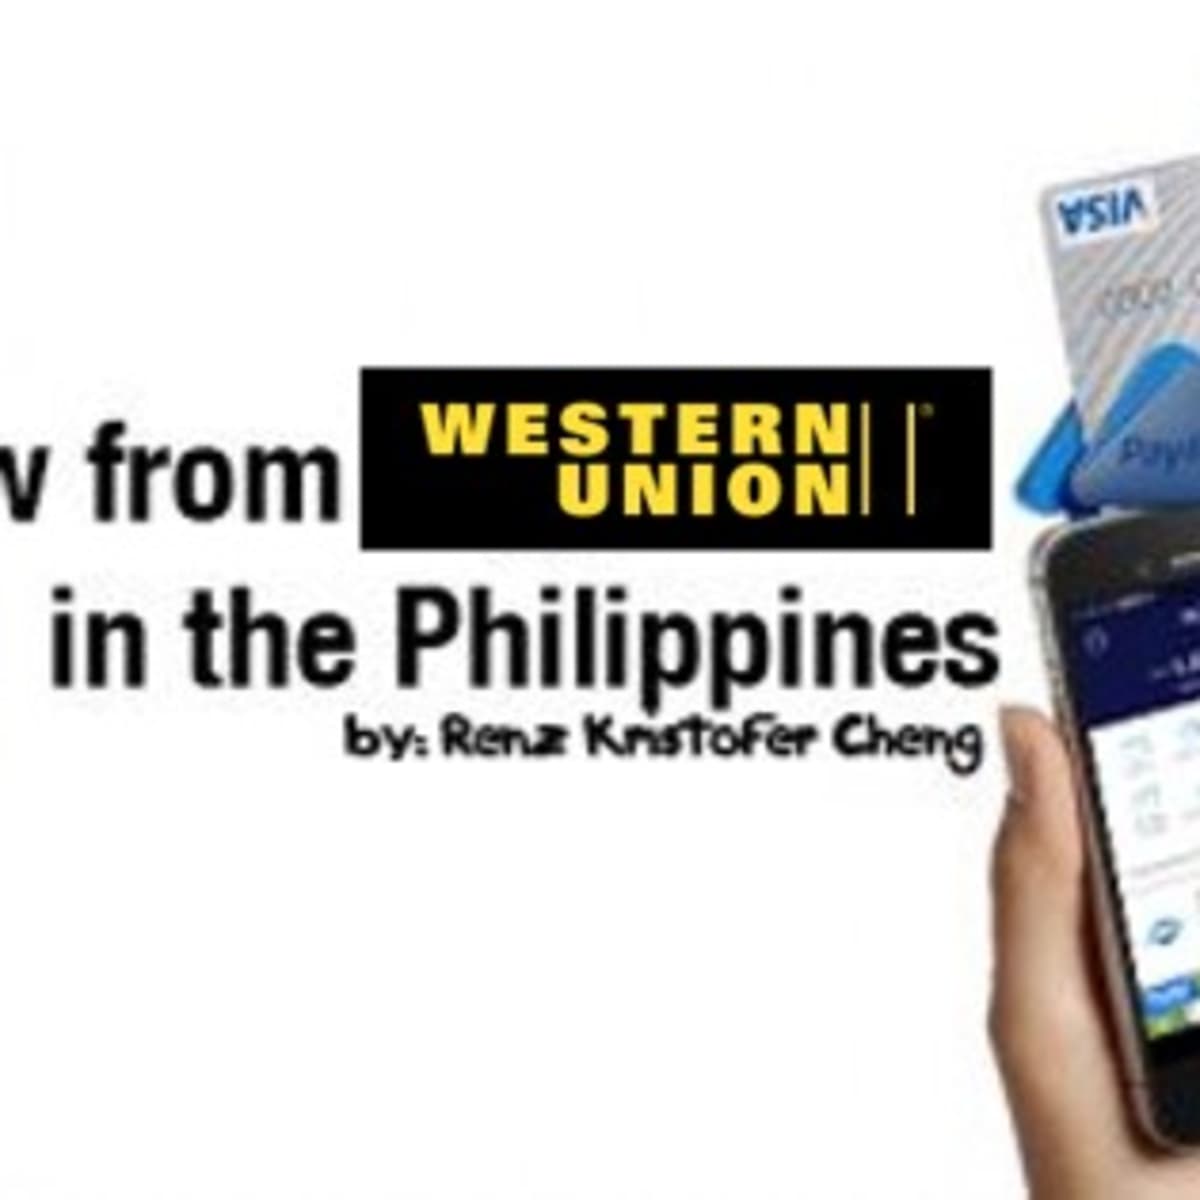 How To Cash In A Western Union Remittance Using Gcash Toughnickel